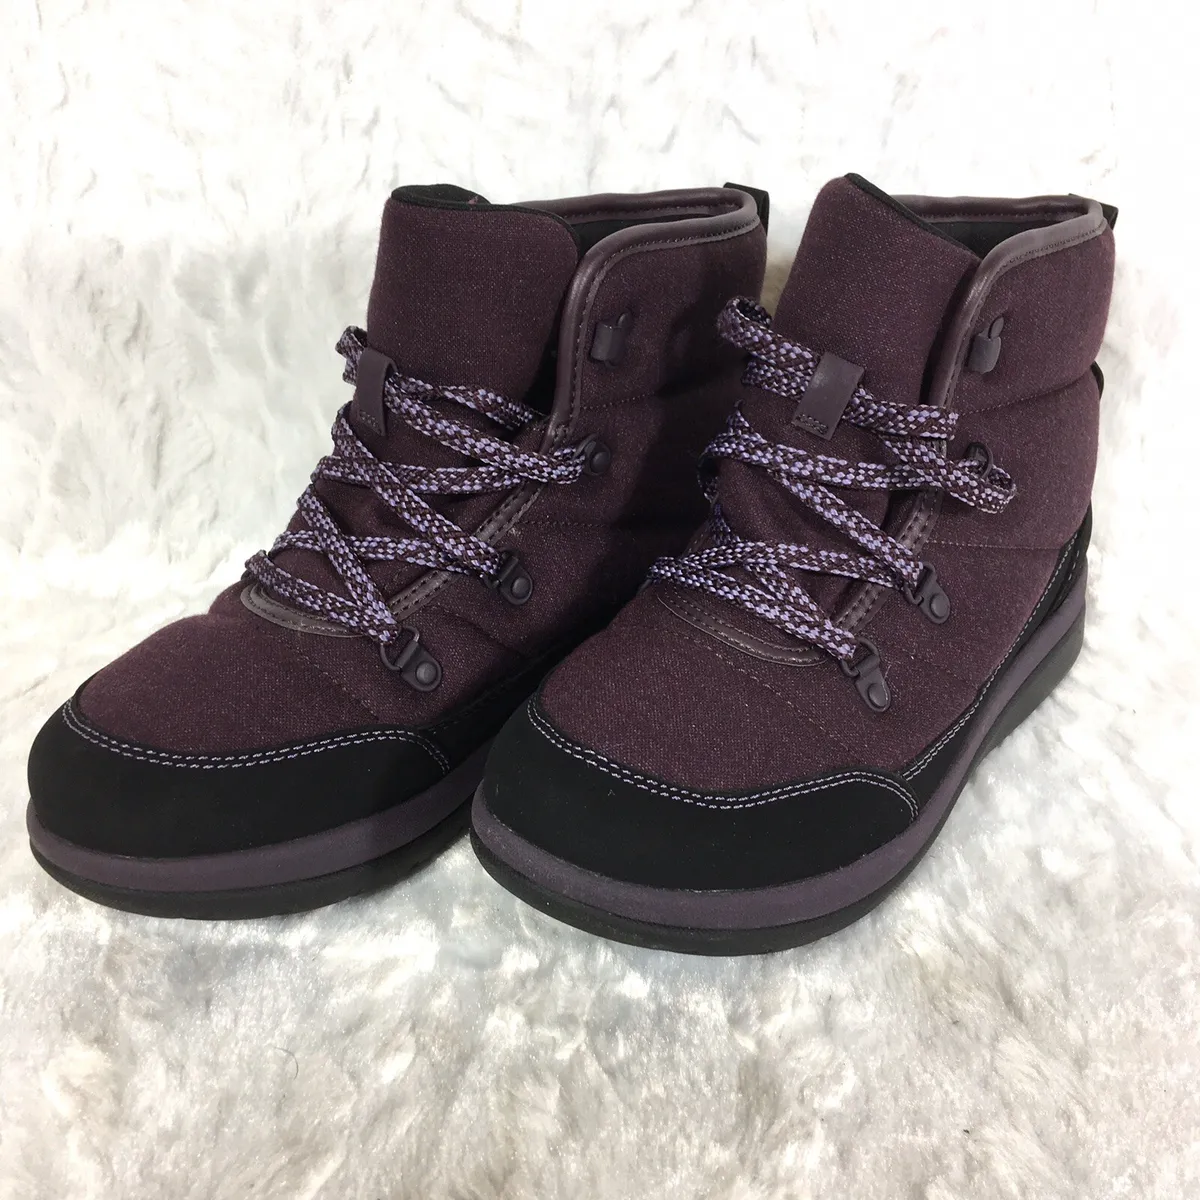 Alojamiento puerta zorro New! Cloudsteppers by Clarks Lace-up Boots Cabrini Cove Aubergine 7M Purple  $120 | eBay